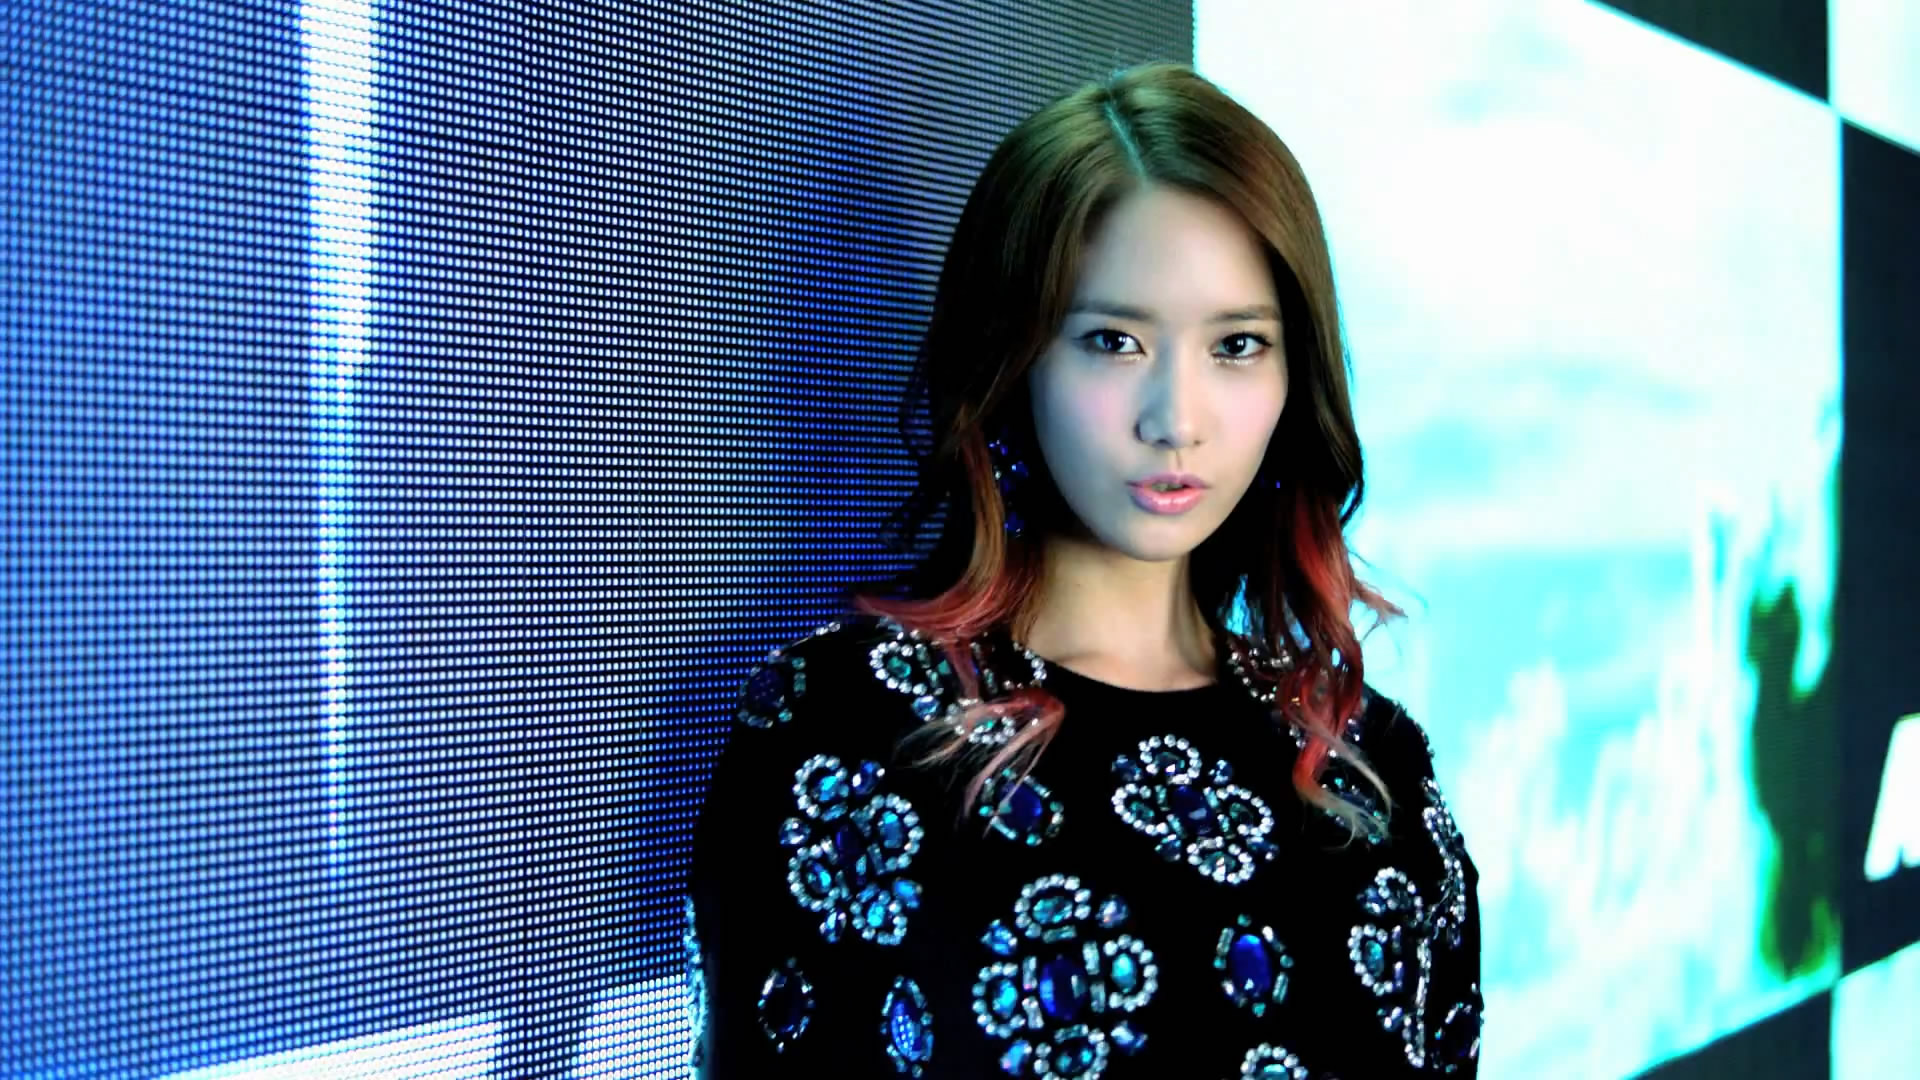 Snsd Yoona Flower Power Screencaps Vlyod S Choices